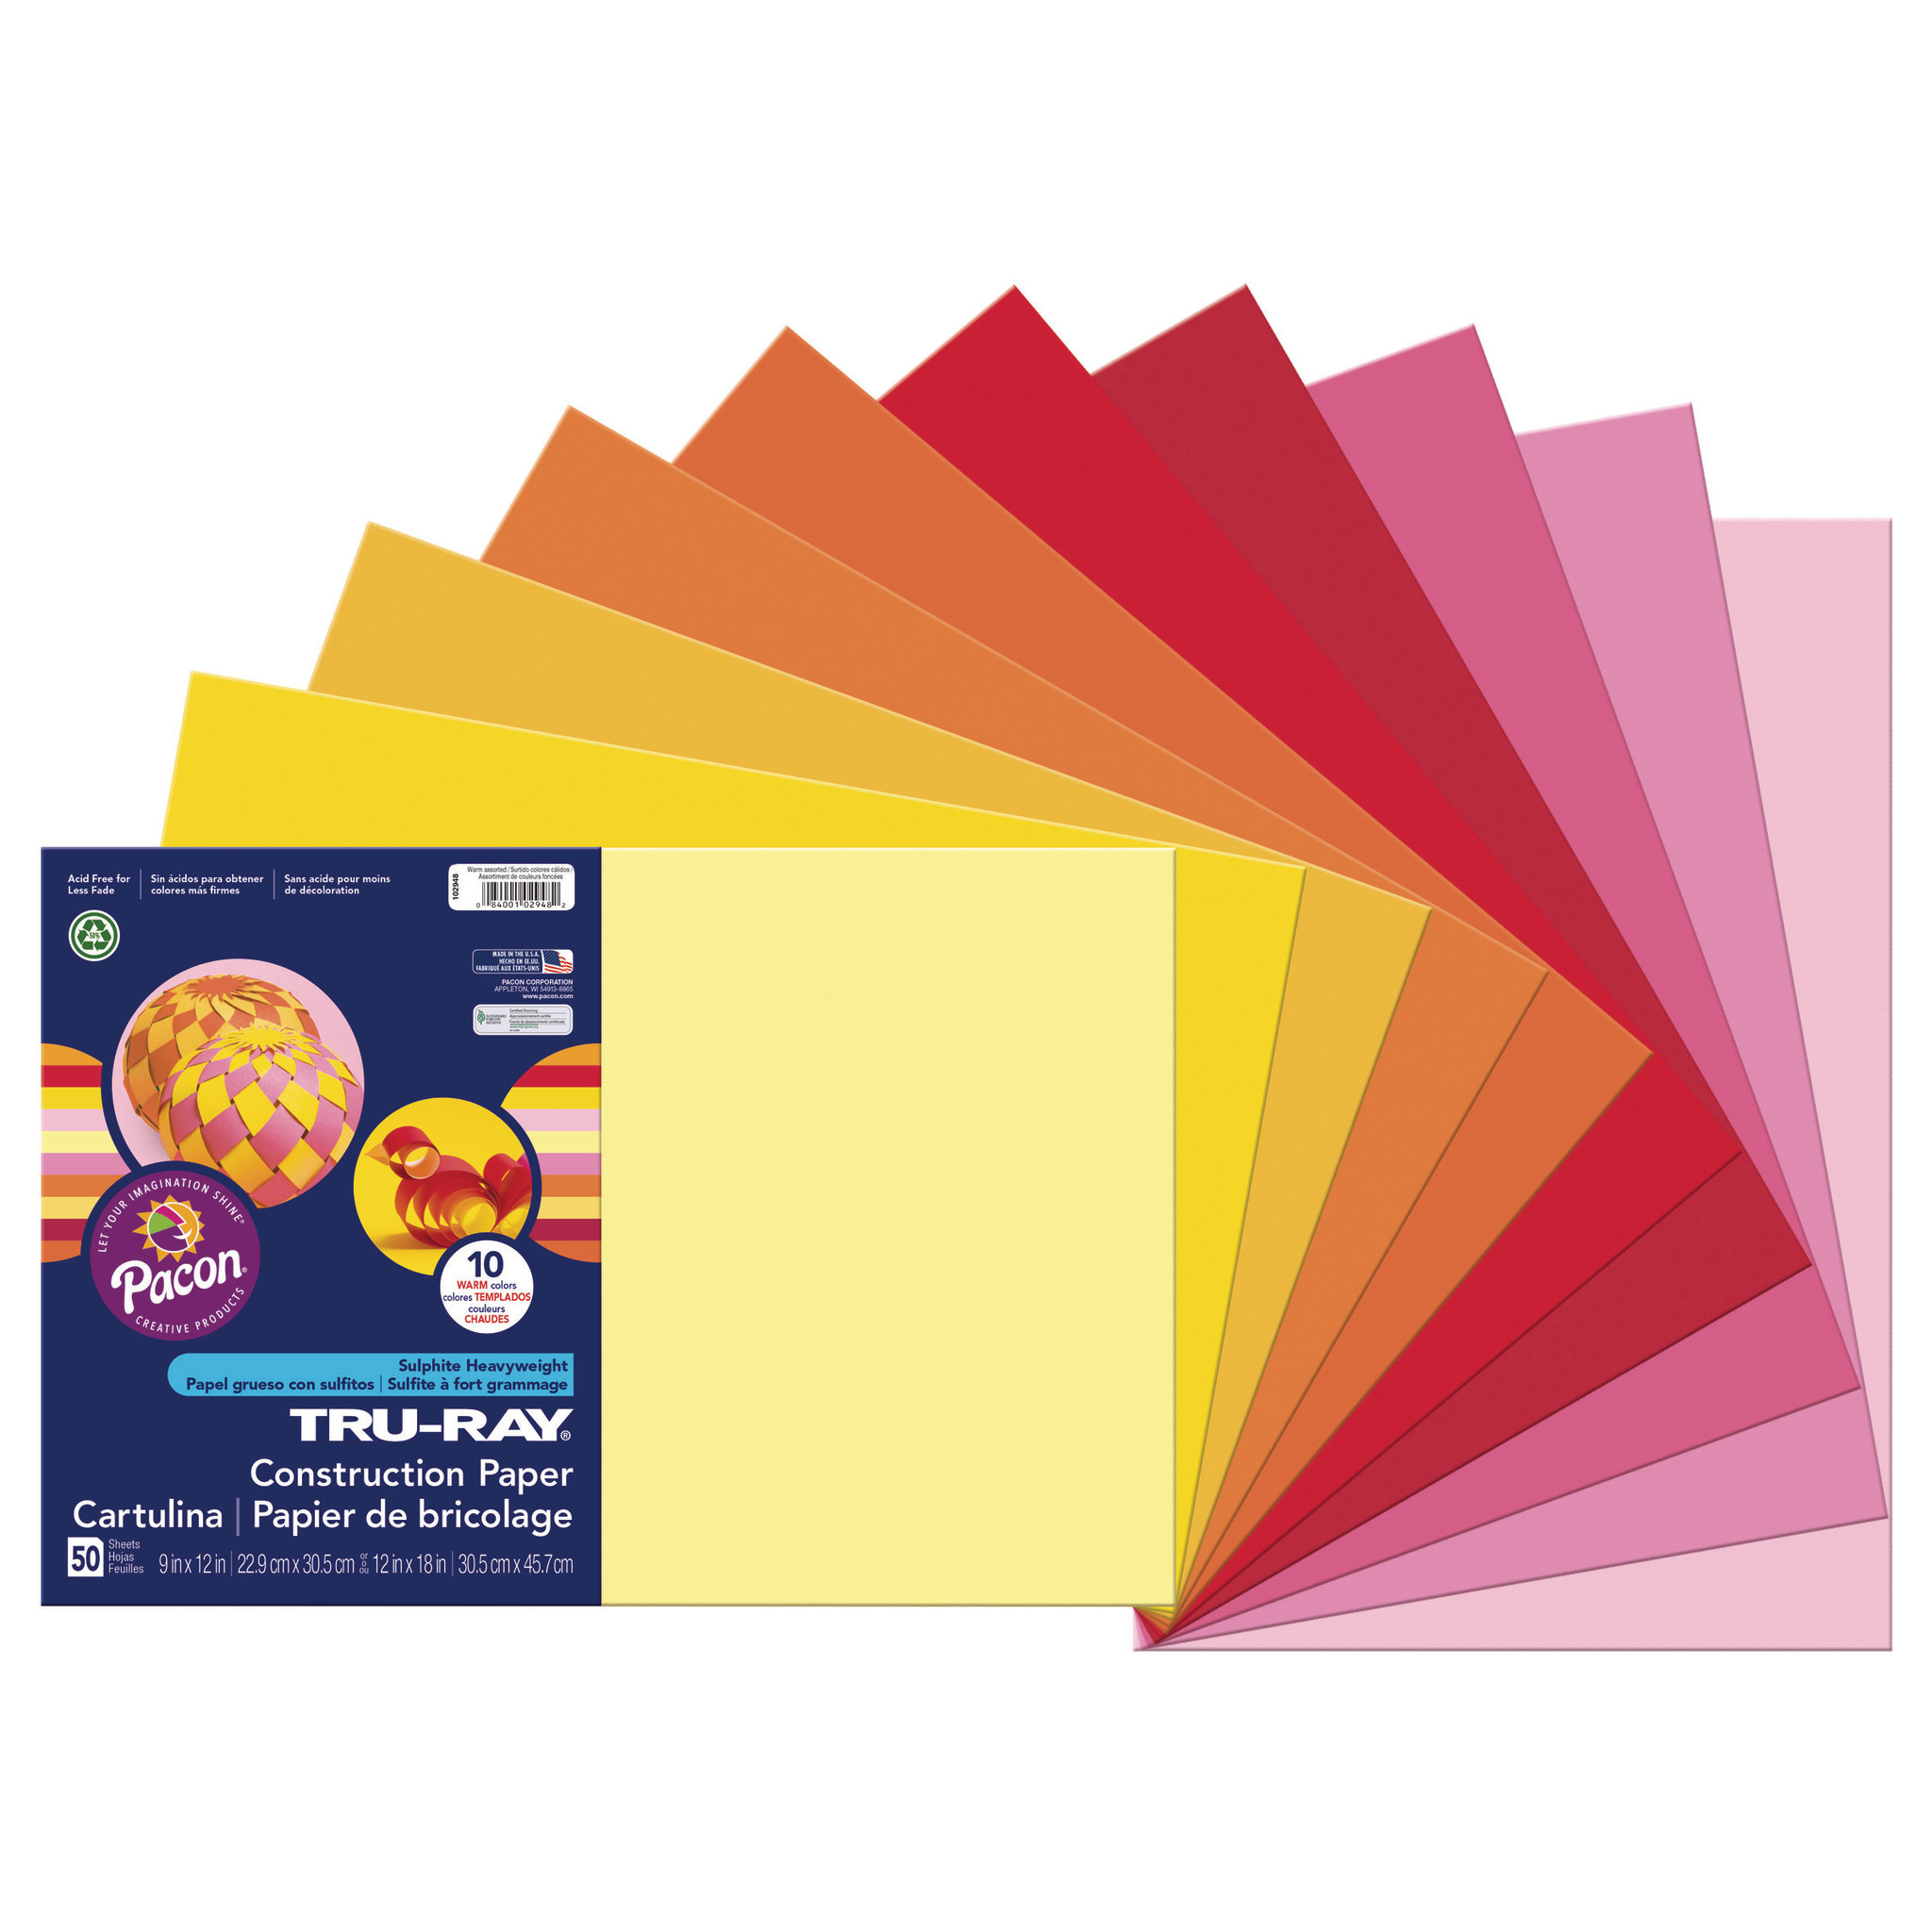 Pacon - Tru-Ray Construction Paper - 12 x 18 - Warm Assorted